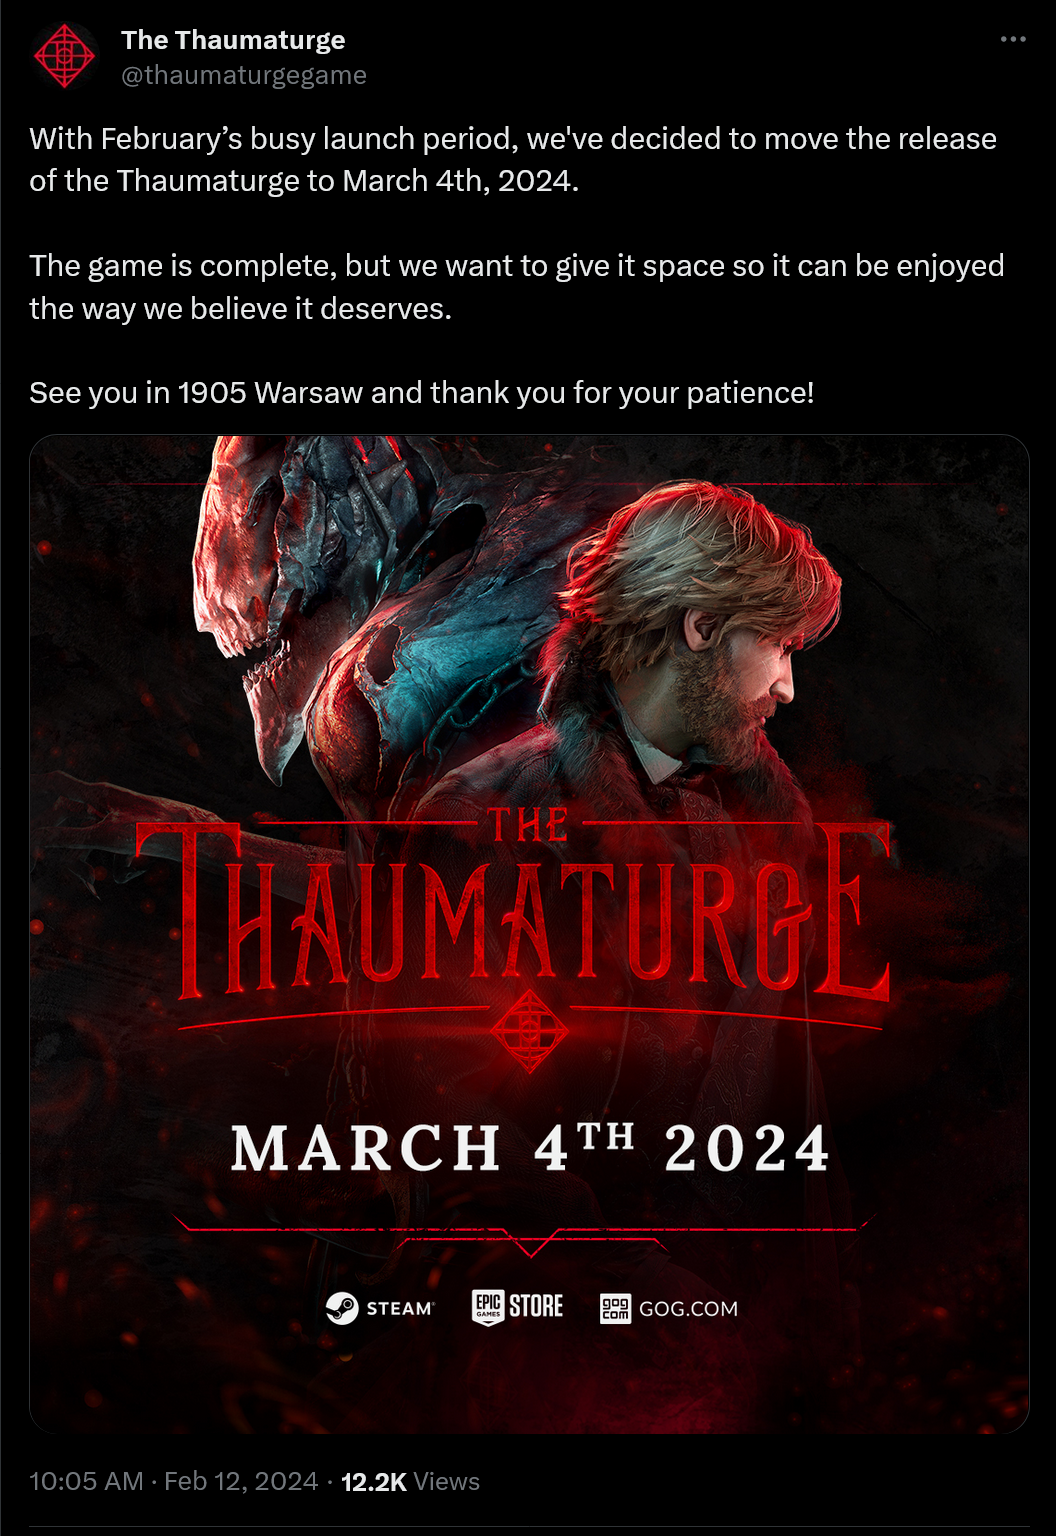 With February’s busy launch period, we've decided to move the release of the Thaumaturge to March 4th, 2024.  The game is complete, but we want to give it space so it can be enjoyed the way we believe it deserves.  See you in 1905 Warsaw and thank you for your patience!